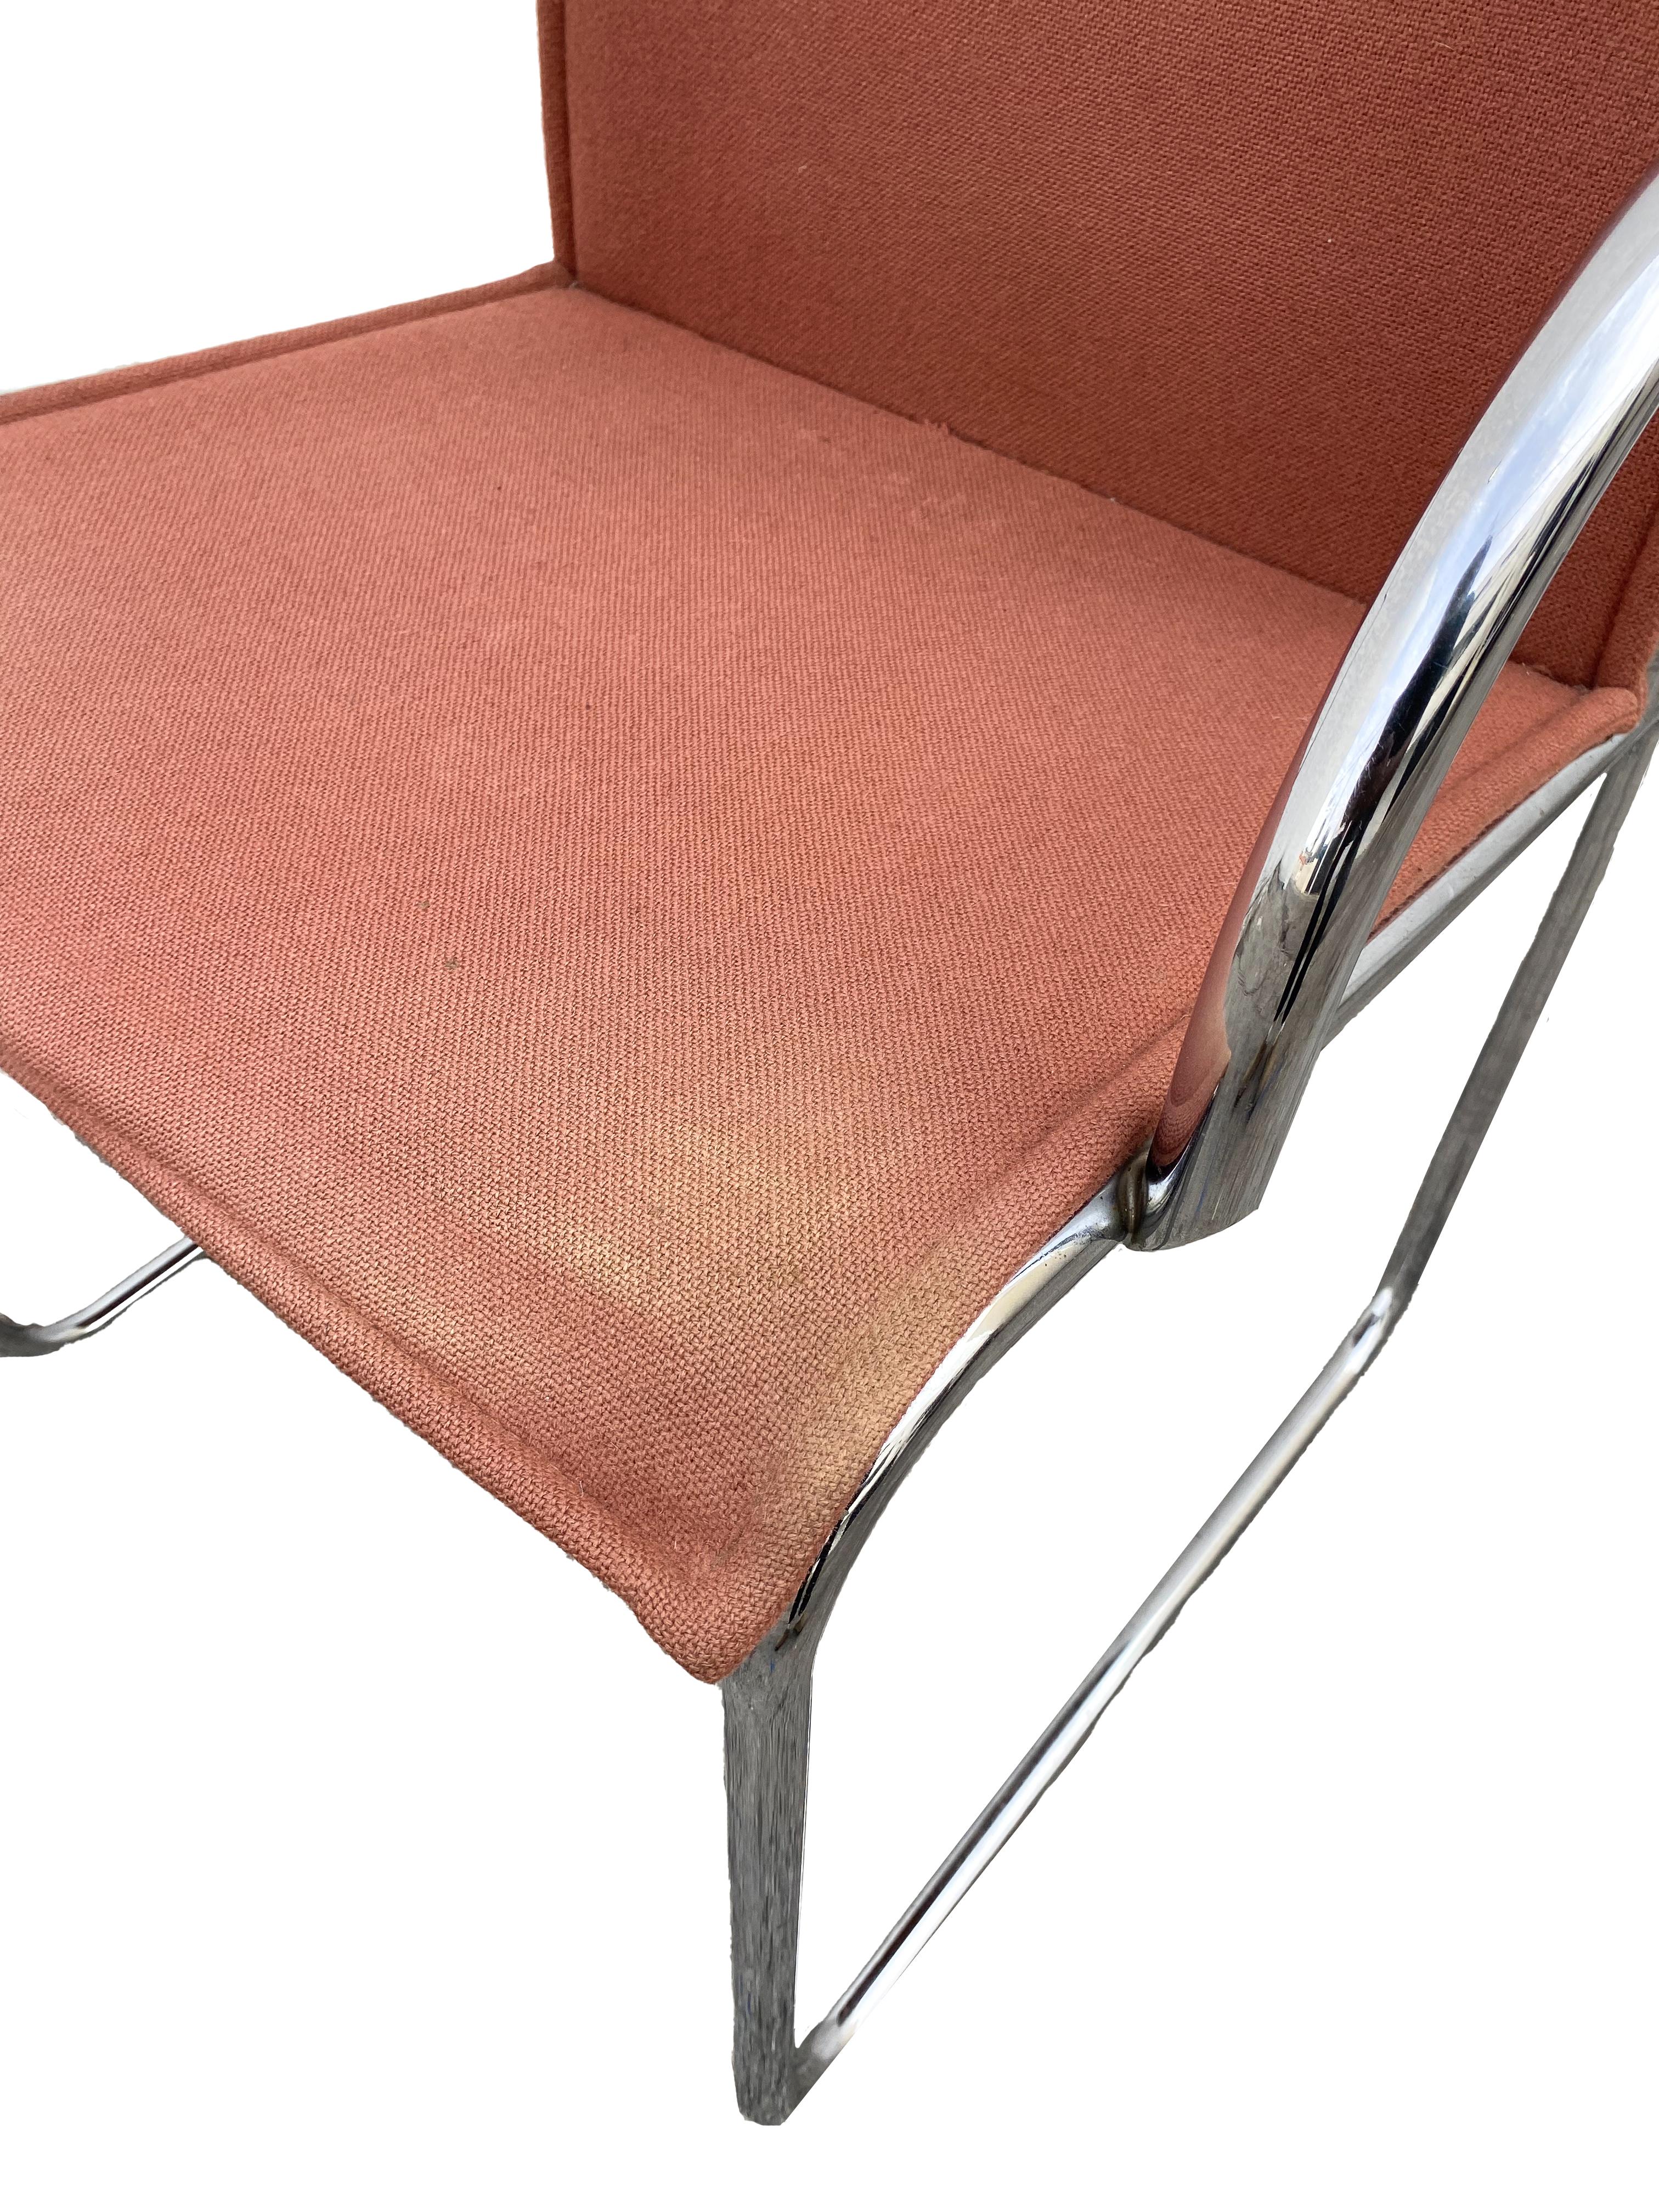 Knoll 1407 Chair by Richard Schultz In Good Condition For Sale In Los Angeles, CA